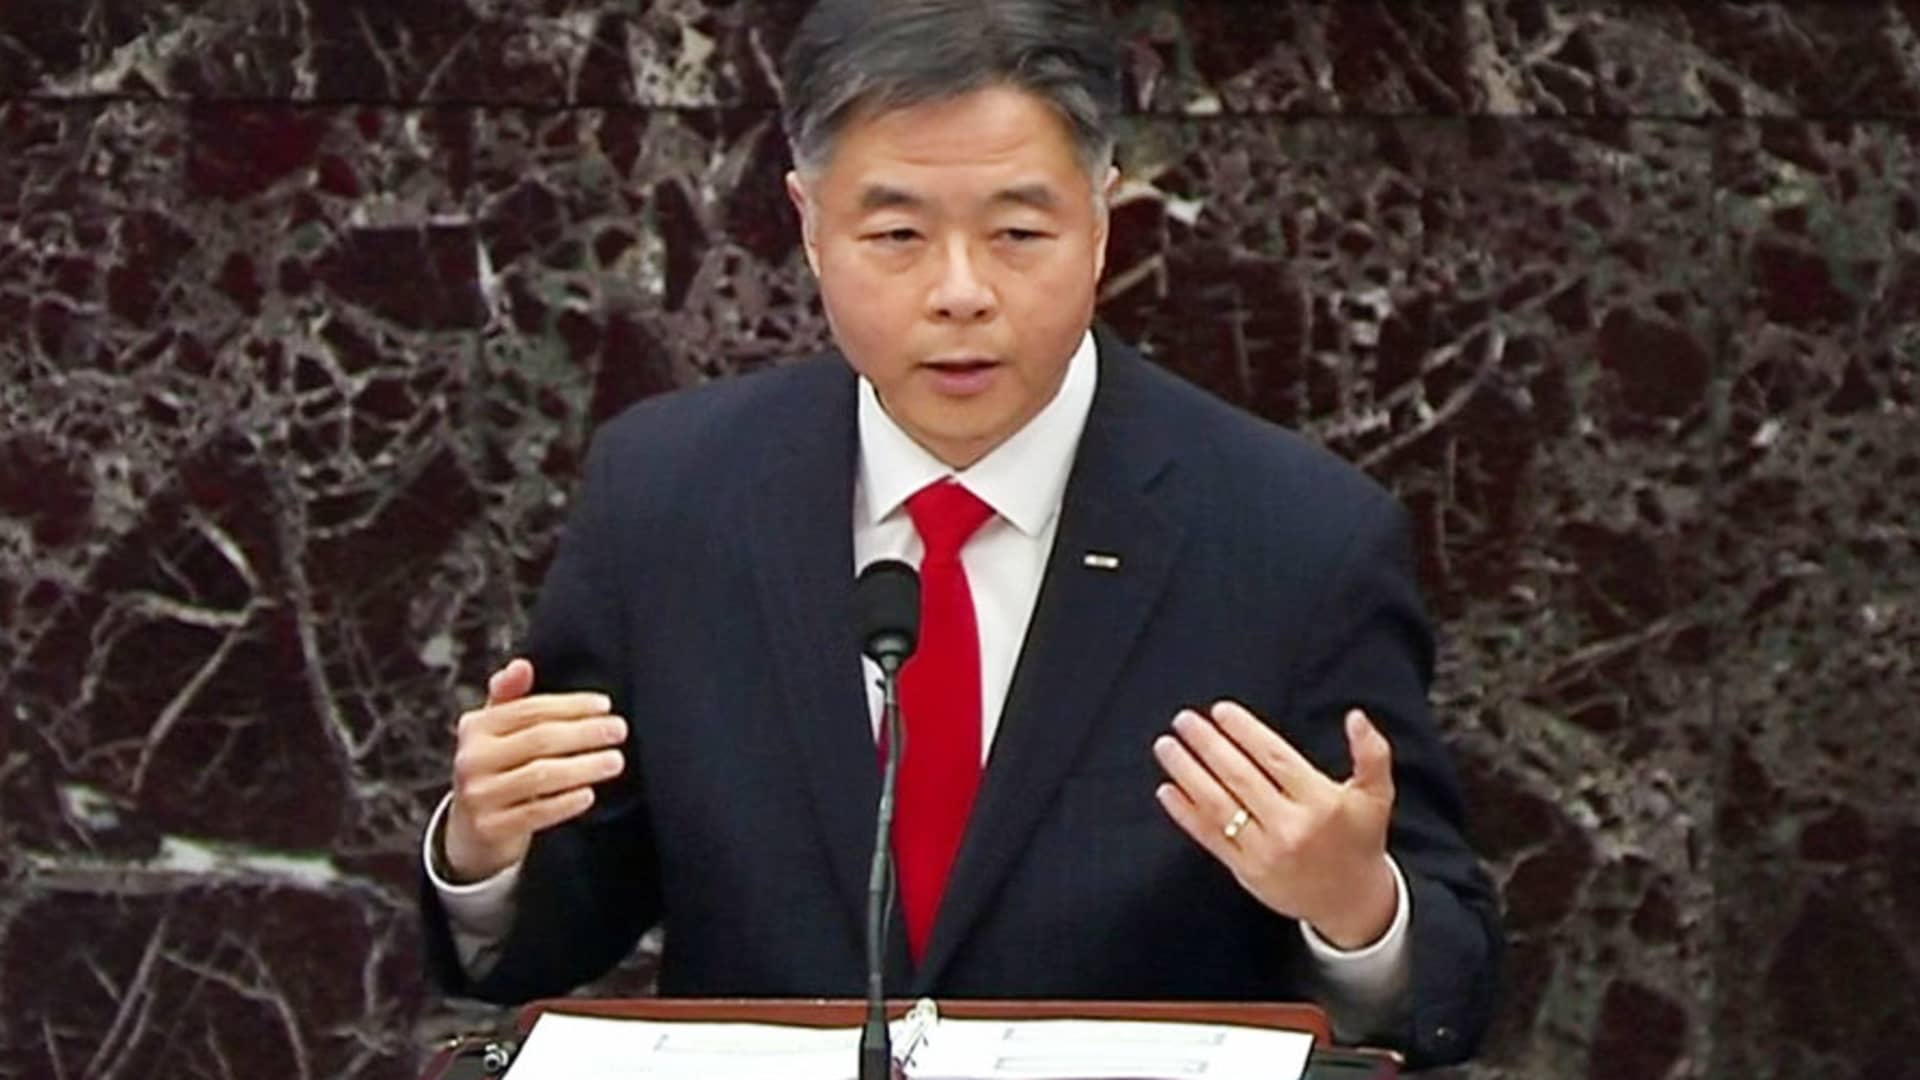 U.S. House impeachment manager Rep. Ted Lieu (D-CA) delivers part of the impeachment managers’ opening argument in the impeachment trial of former President Donald Trump, on charges of inciting the deadly attack on the U.S. Capitol, on the floor of the Senate chamber on Capitol Hill in Washington, February 10, 2021.